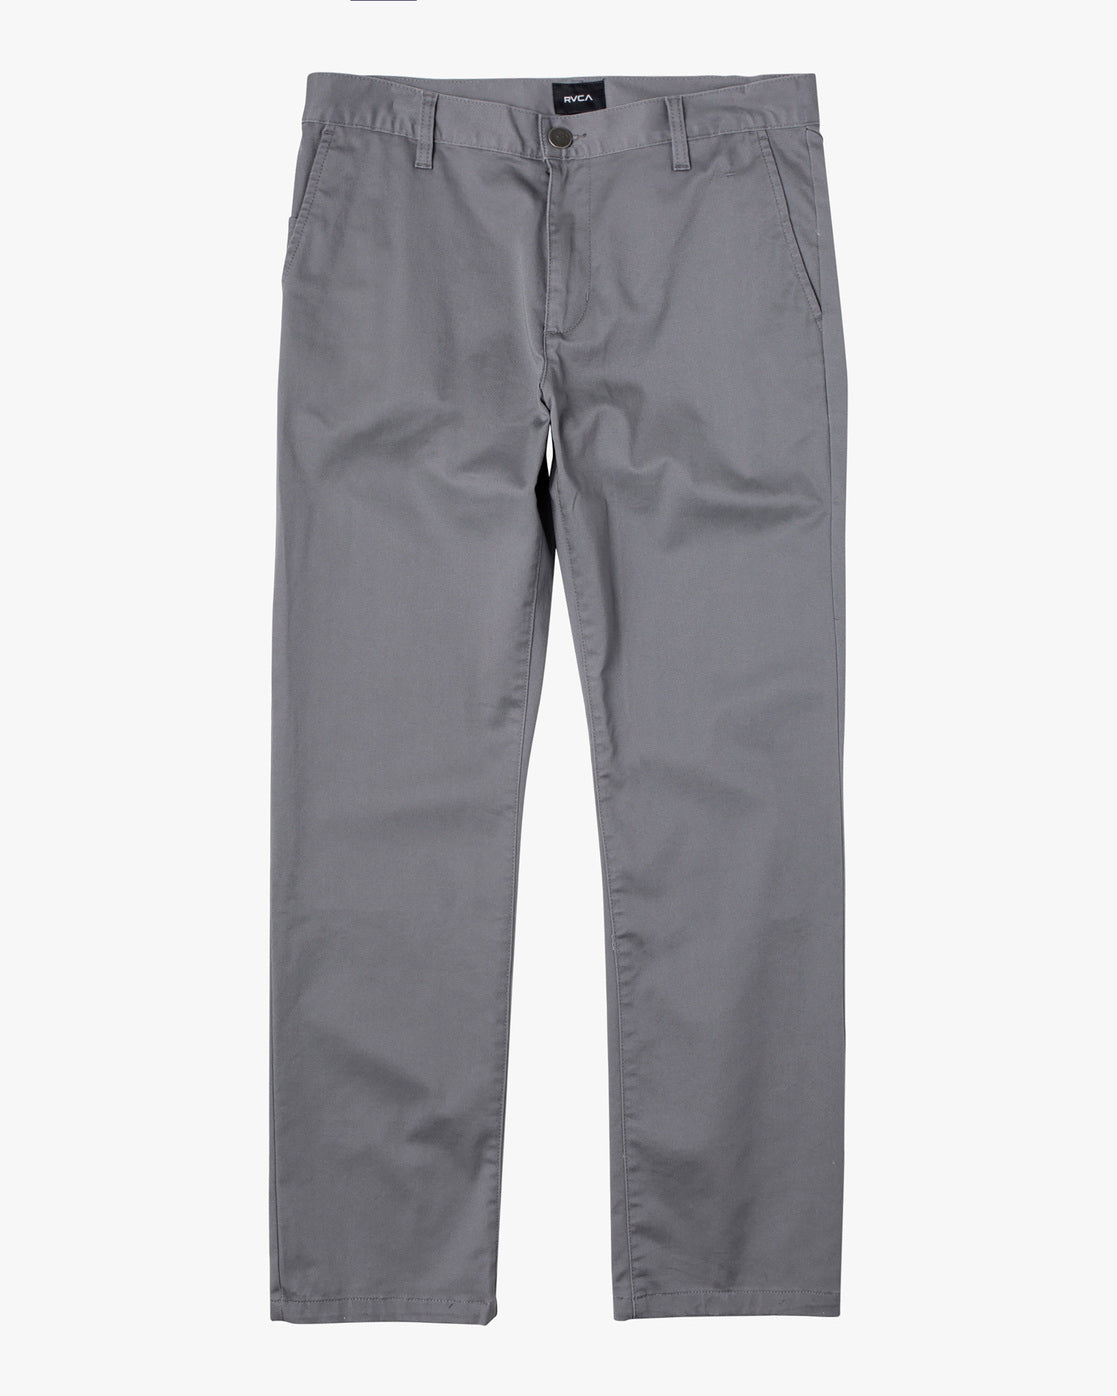 The Weekend Stretch Pants